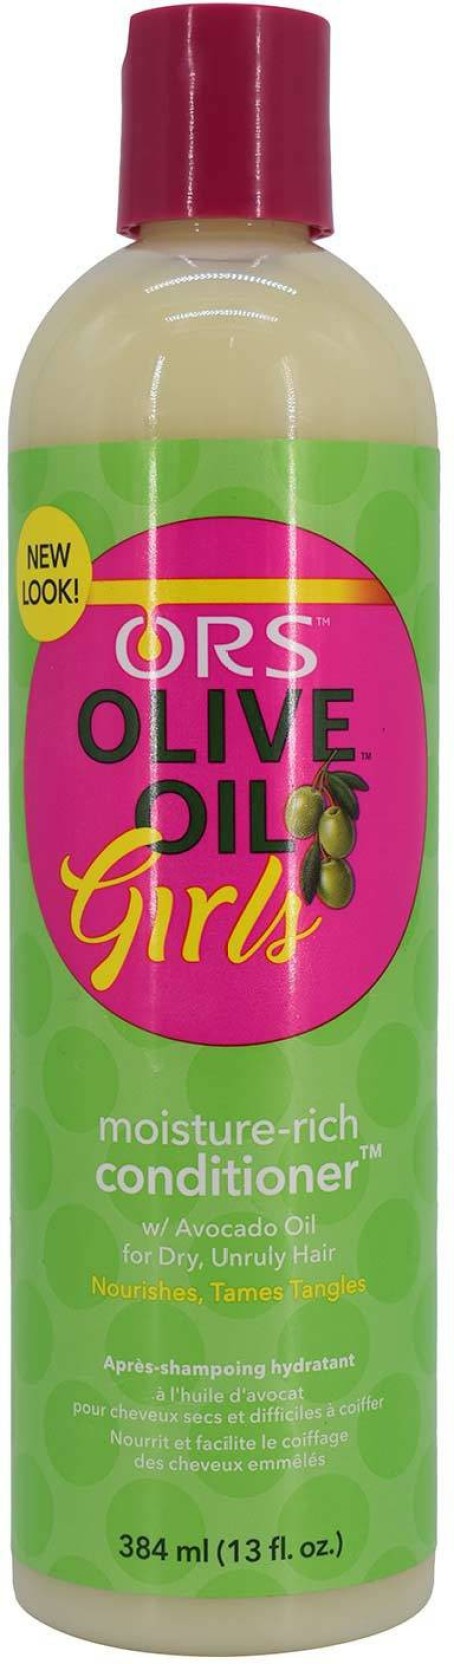 ORS Olive Oil  Girls Conditioner